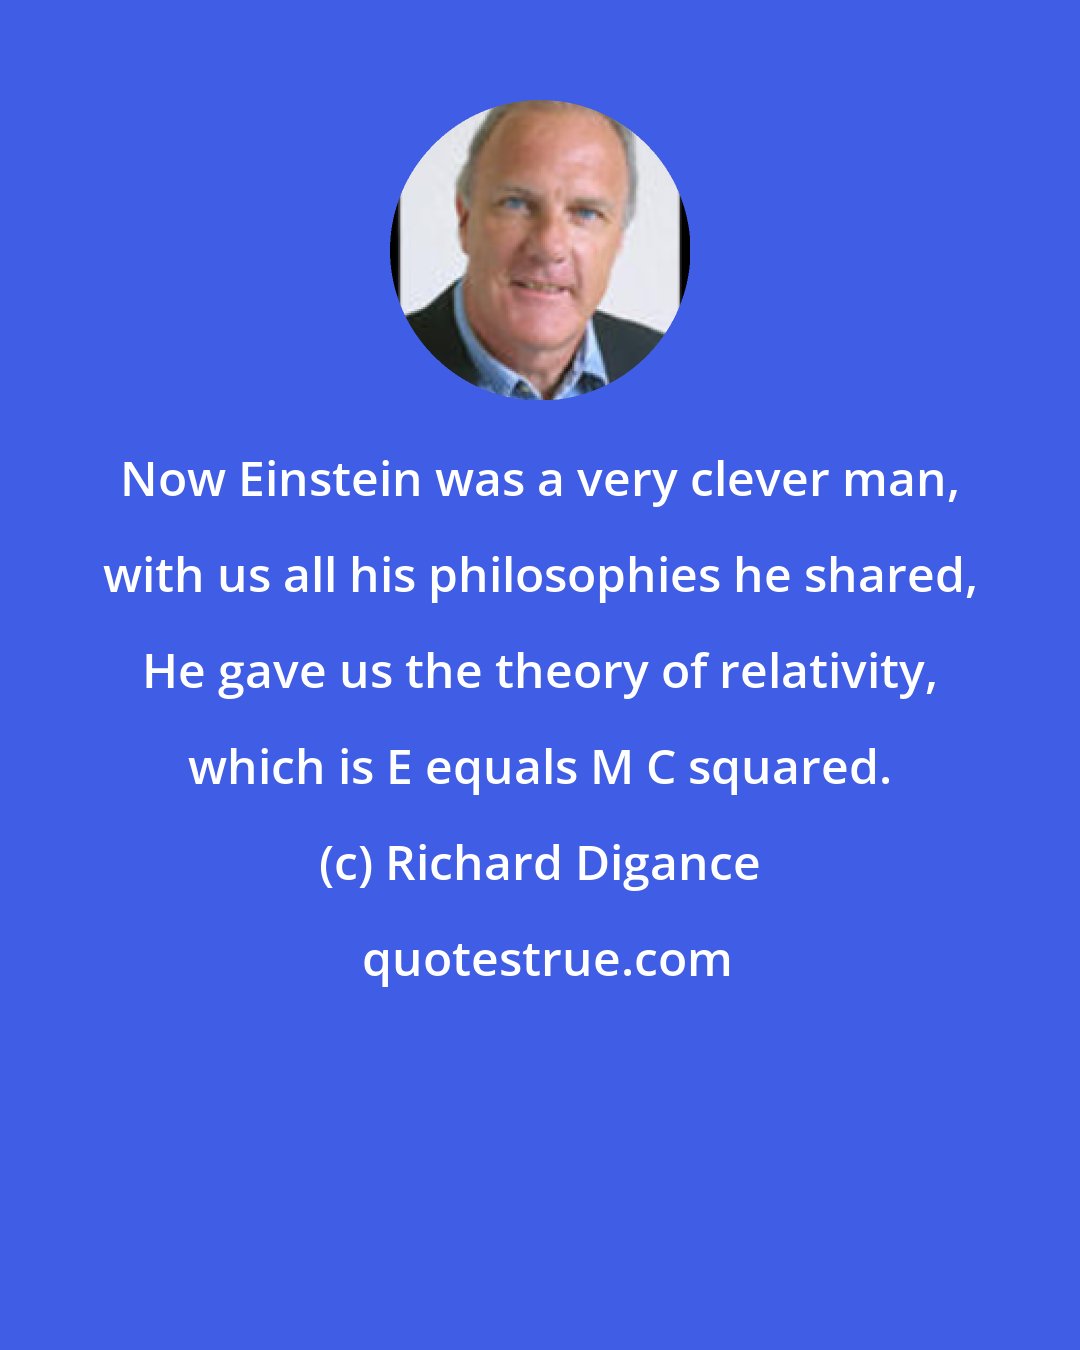 Richard Digance: Now Einstein was a very clever man, with us all his philosophies he shared, He gave us the theory of relativity, which is E equals M C squared.